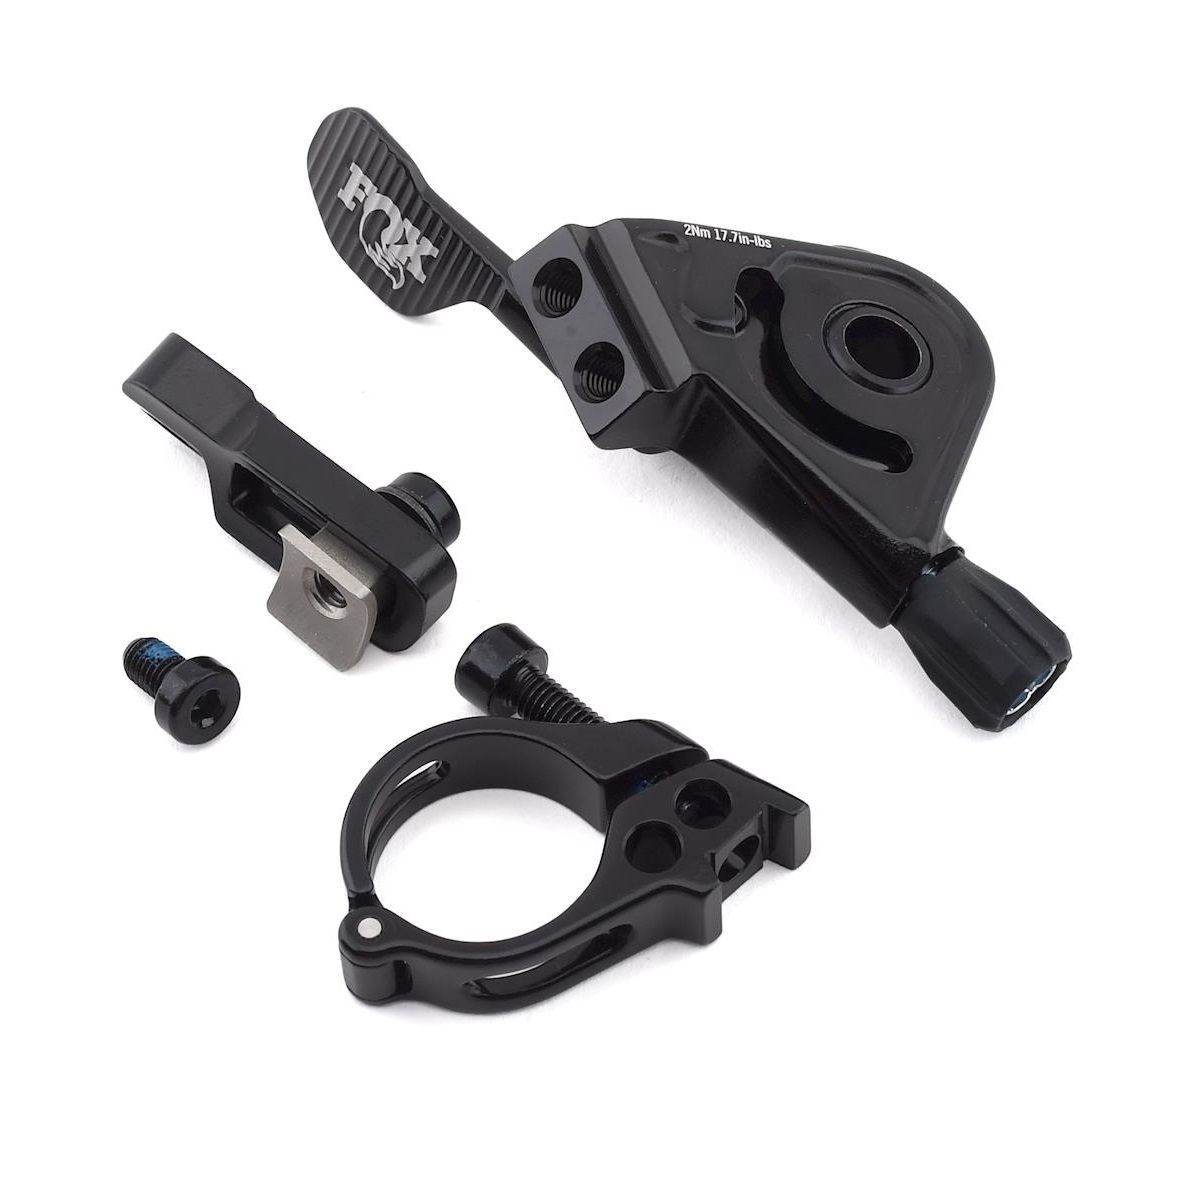 Remote lever for transfer seatpost 1x with collar and Matchmaker X - Sram and I-Spec EV